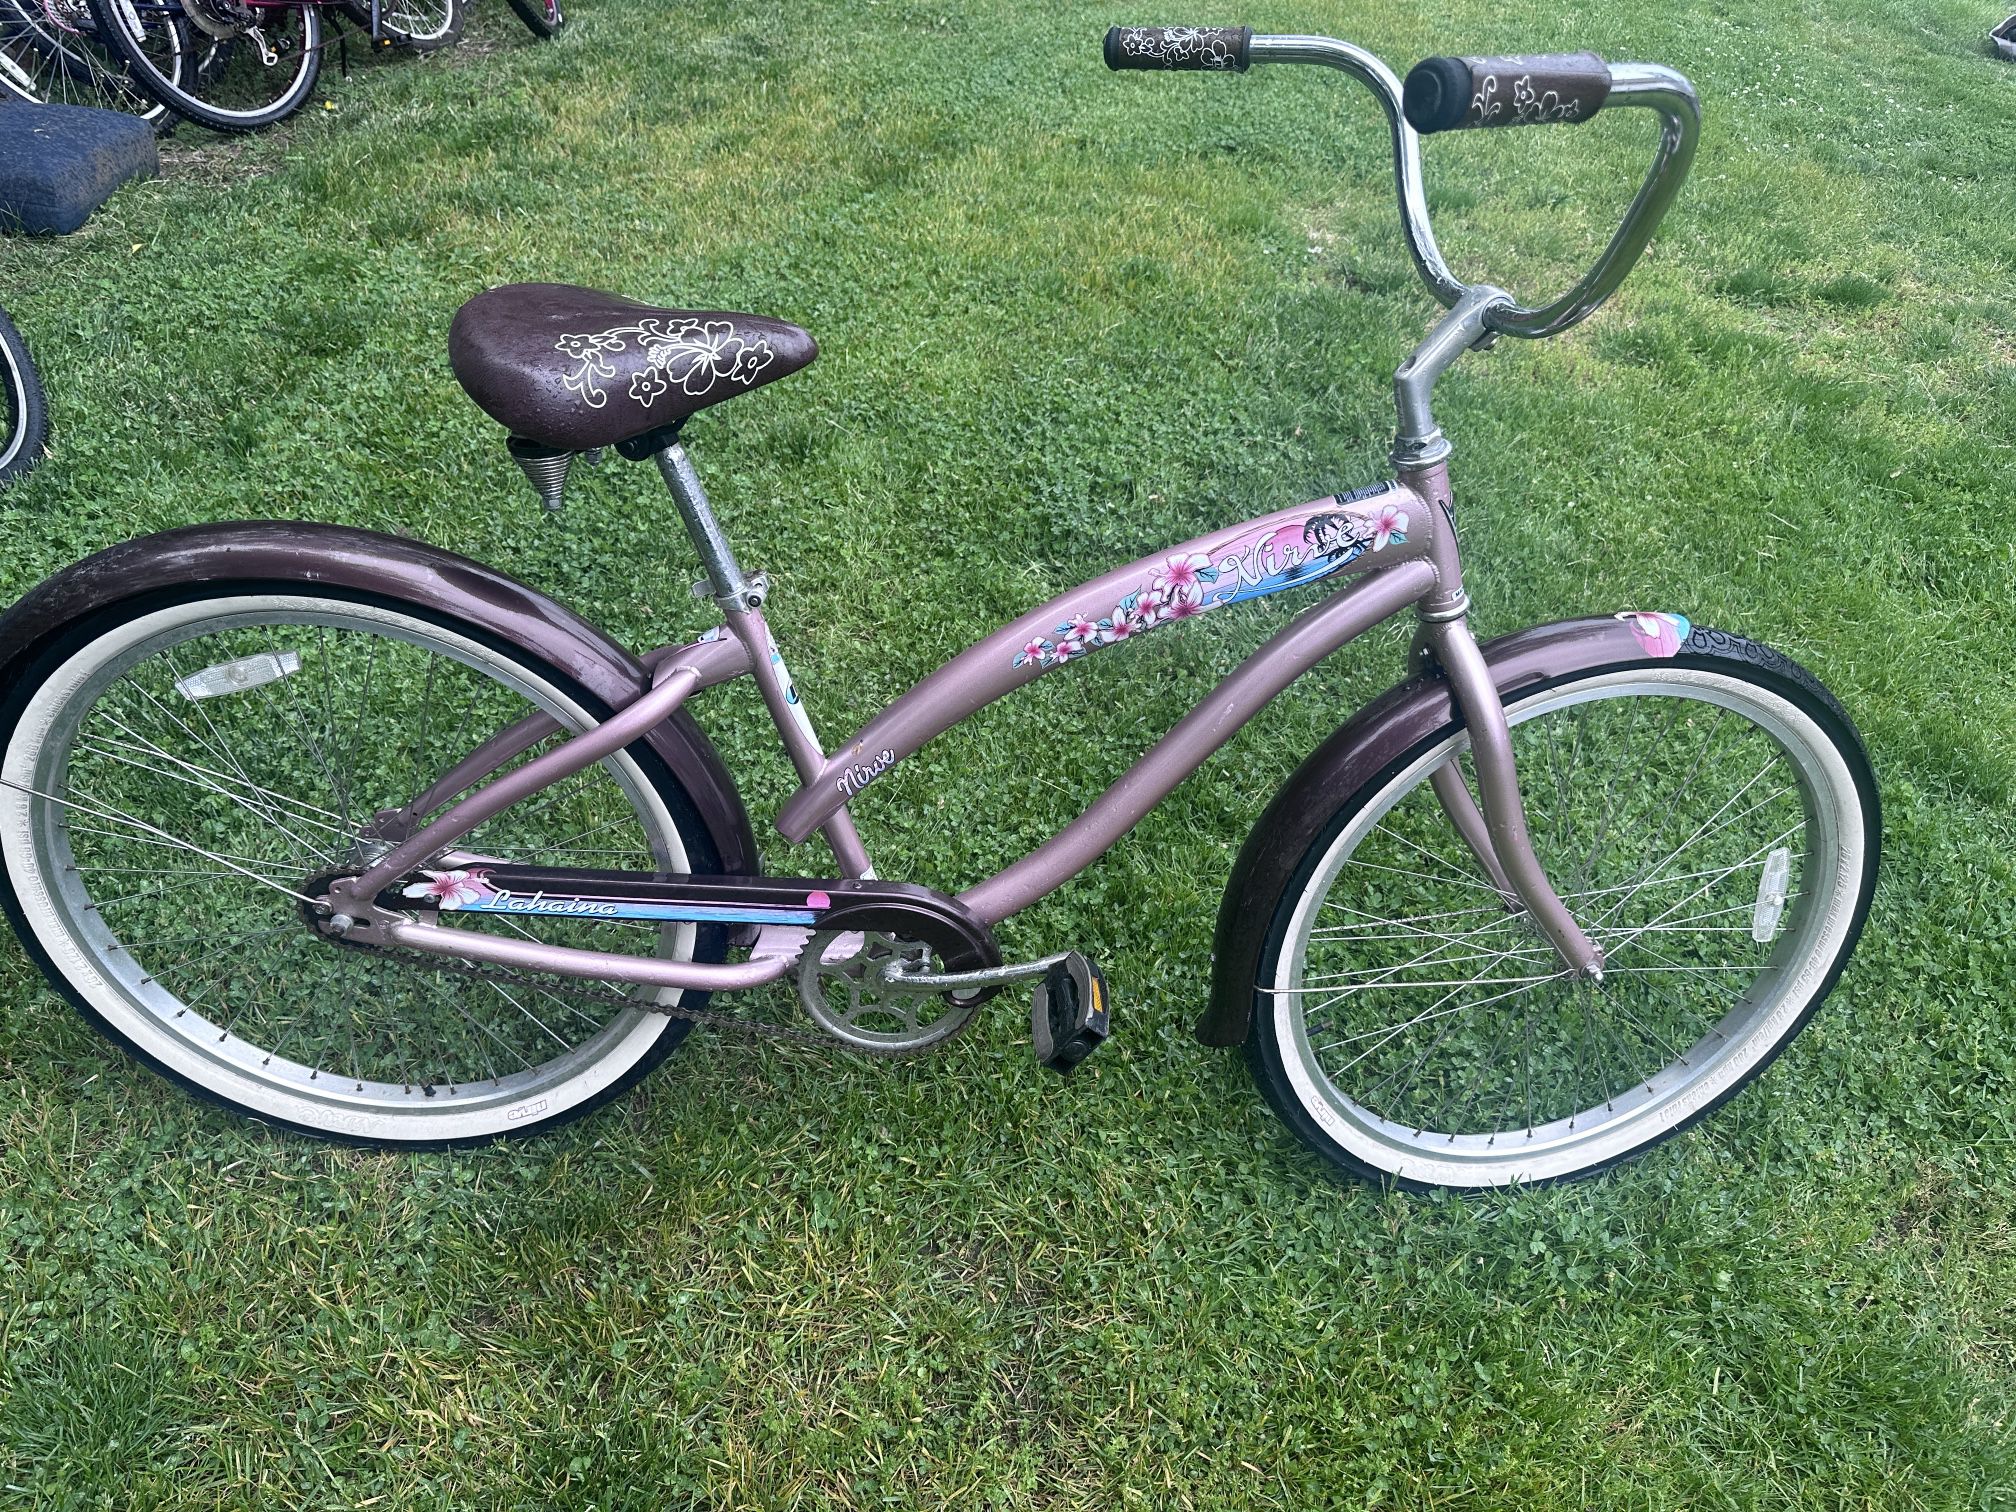 NIRVE BEACH CRUISER ADULT BICYCLE 26” wheels bike in great condition